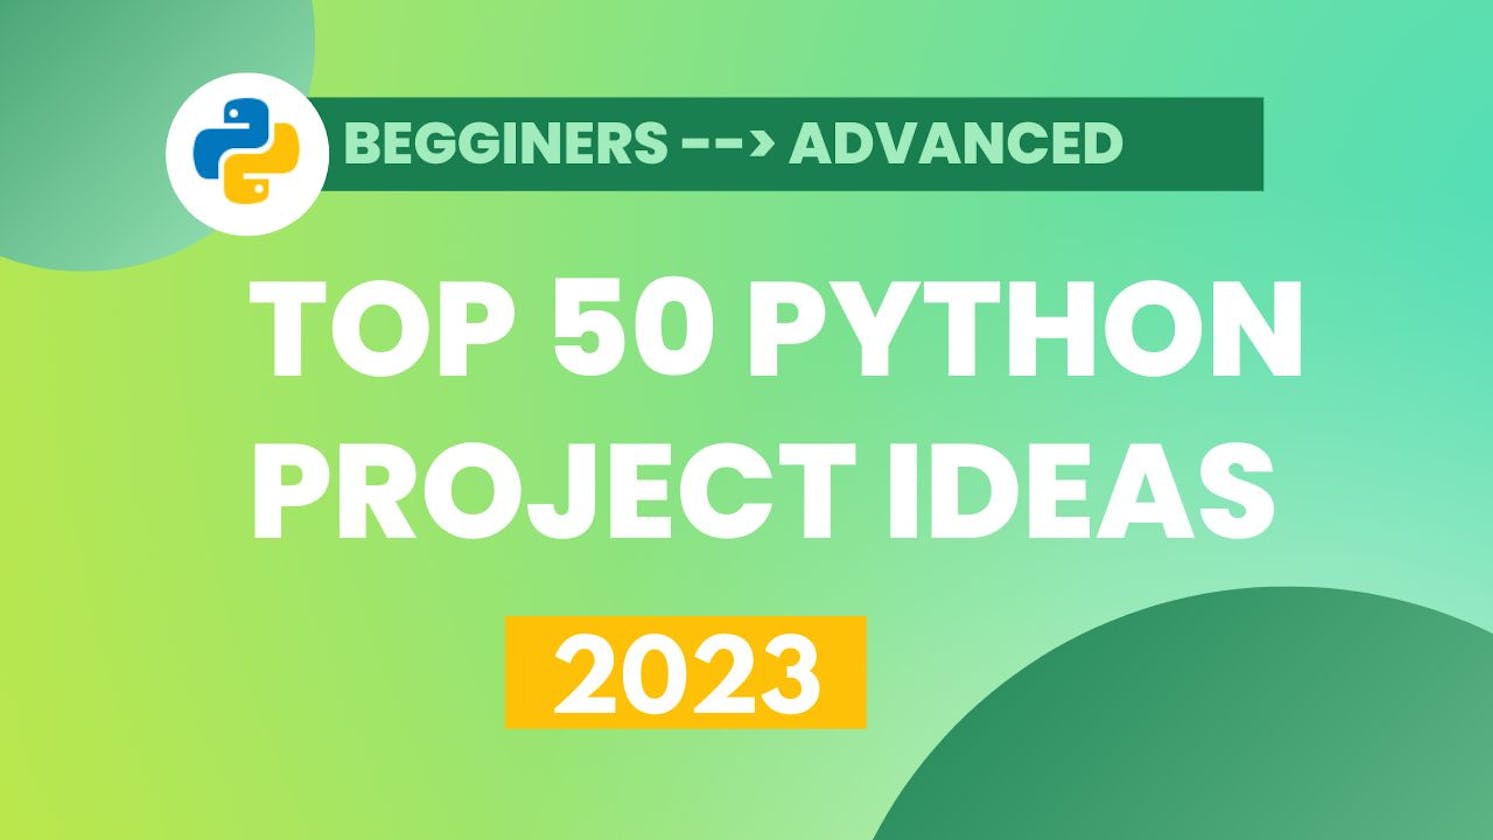 Top 50 Python Project Ideas for 2023